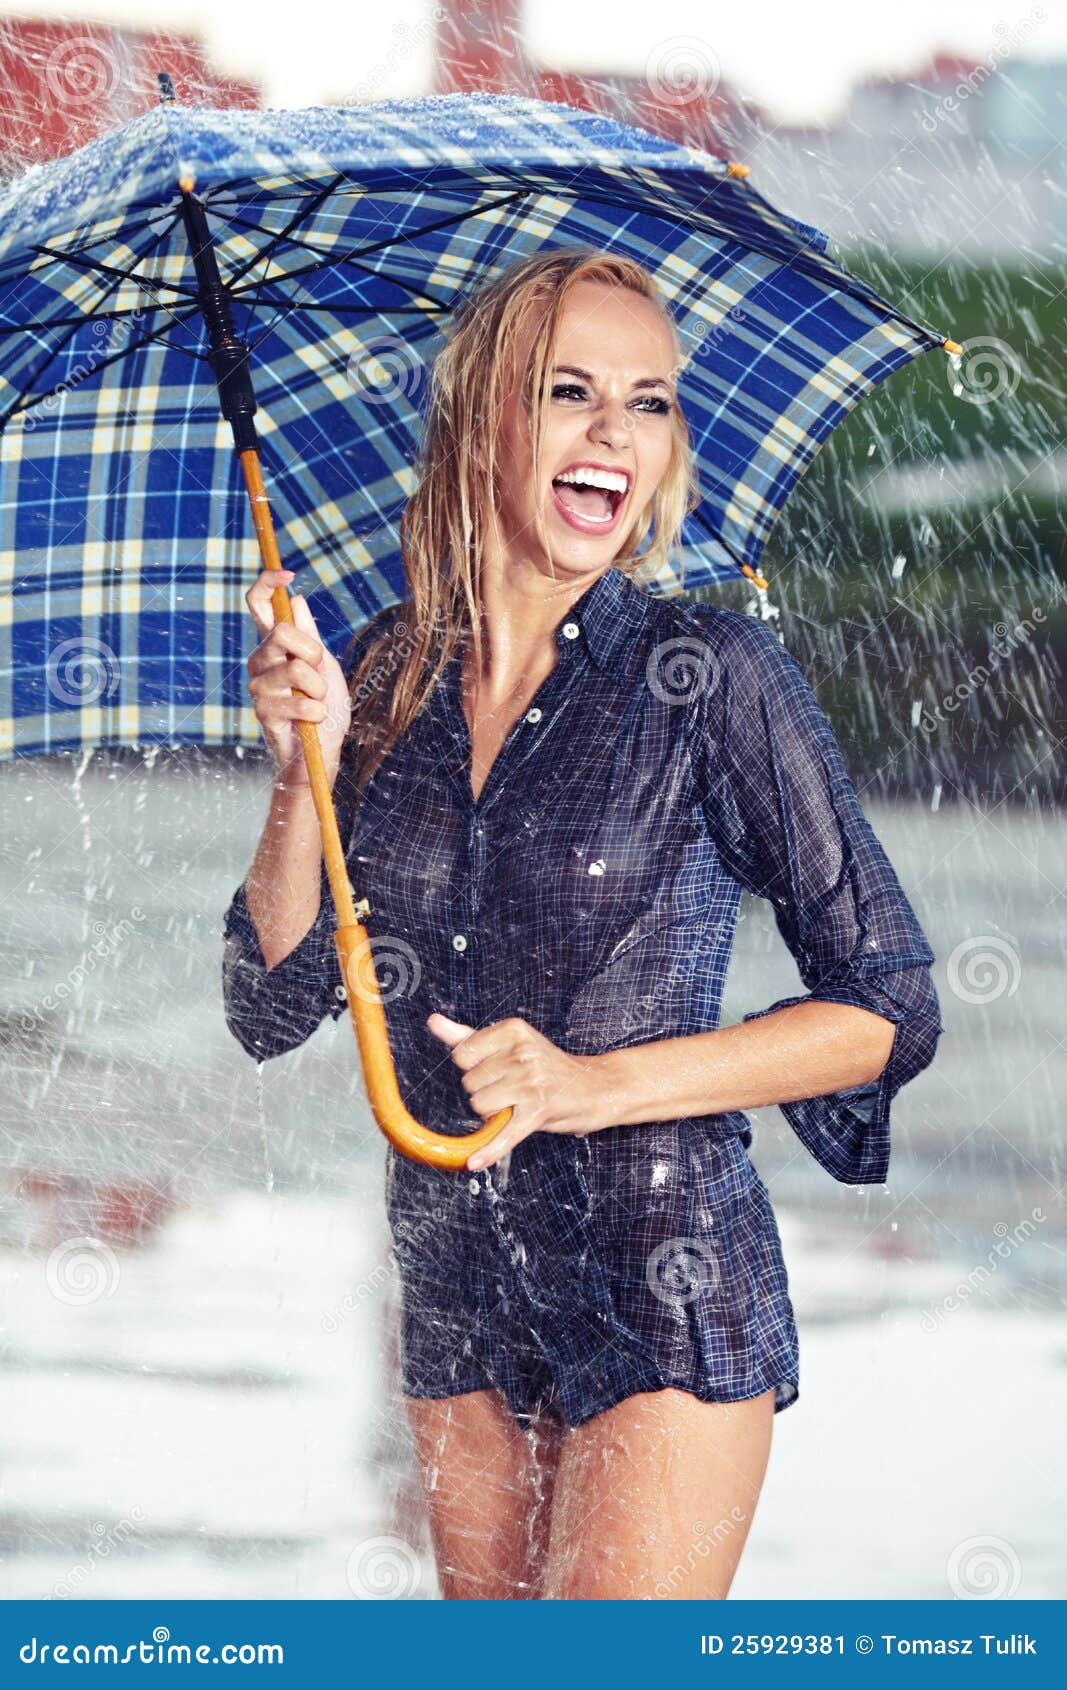 The Wet Girl In The Rain Royalty Free Stock Photography 